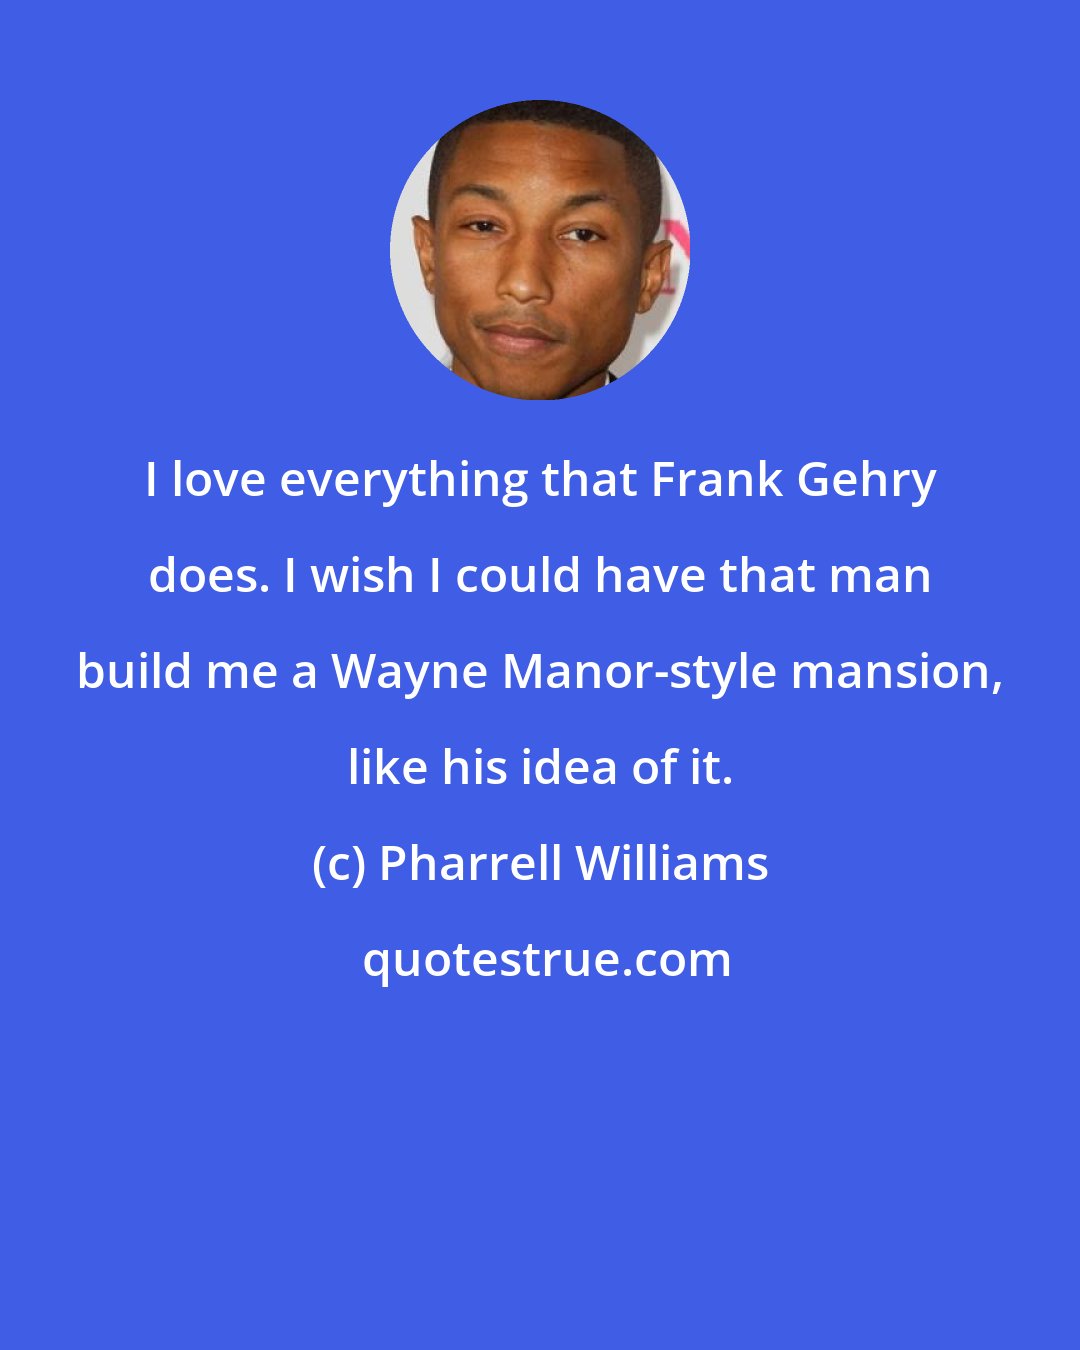 Pharrell Williams: I love everything that Frank Gehry does. I wish I could have that man build me a Wayne Manor-style mansion, like his idea of it.